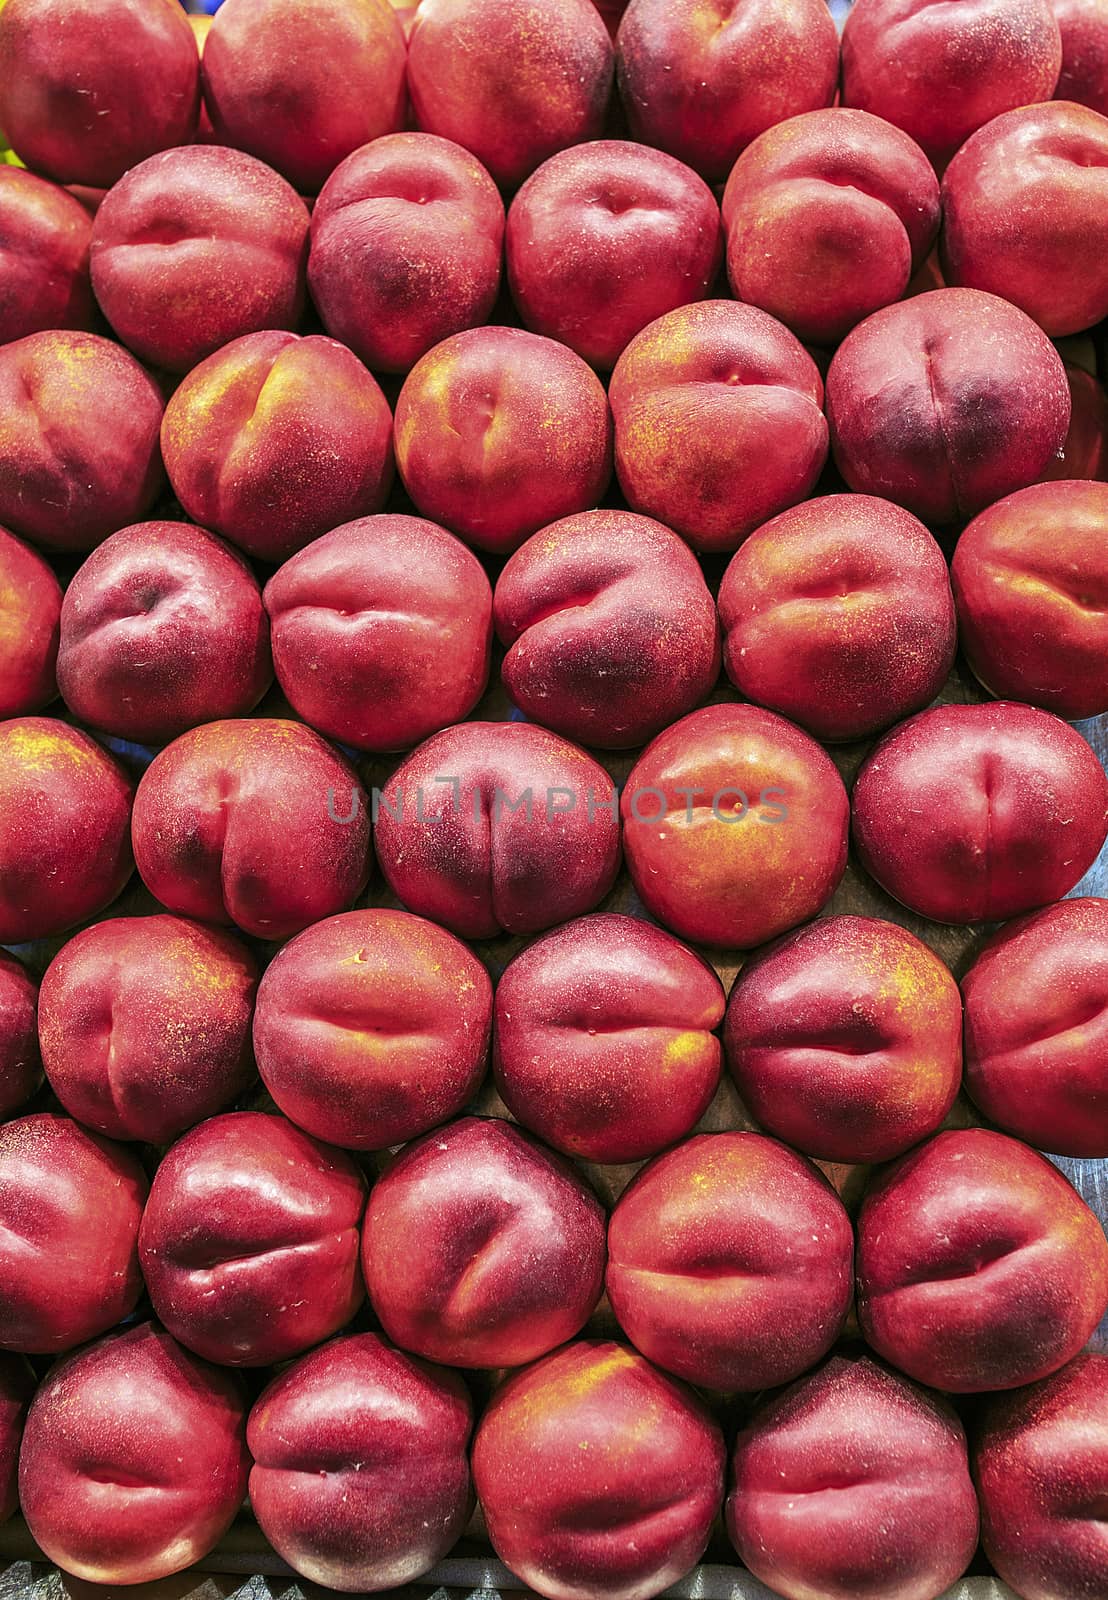 Group of nectarines in a market